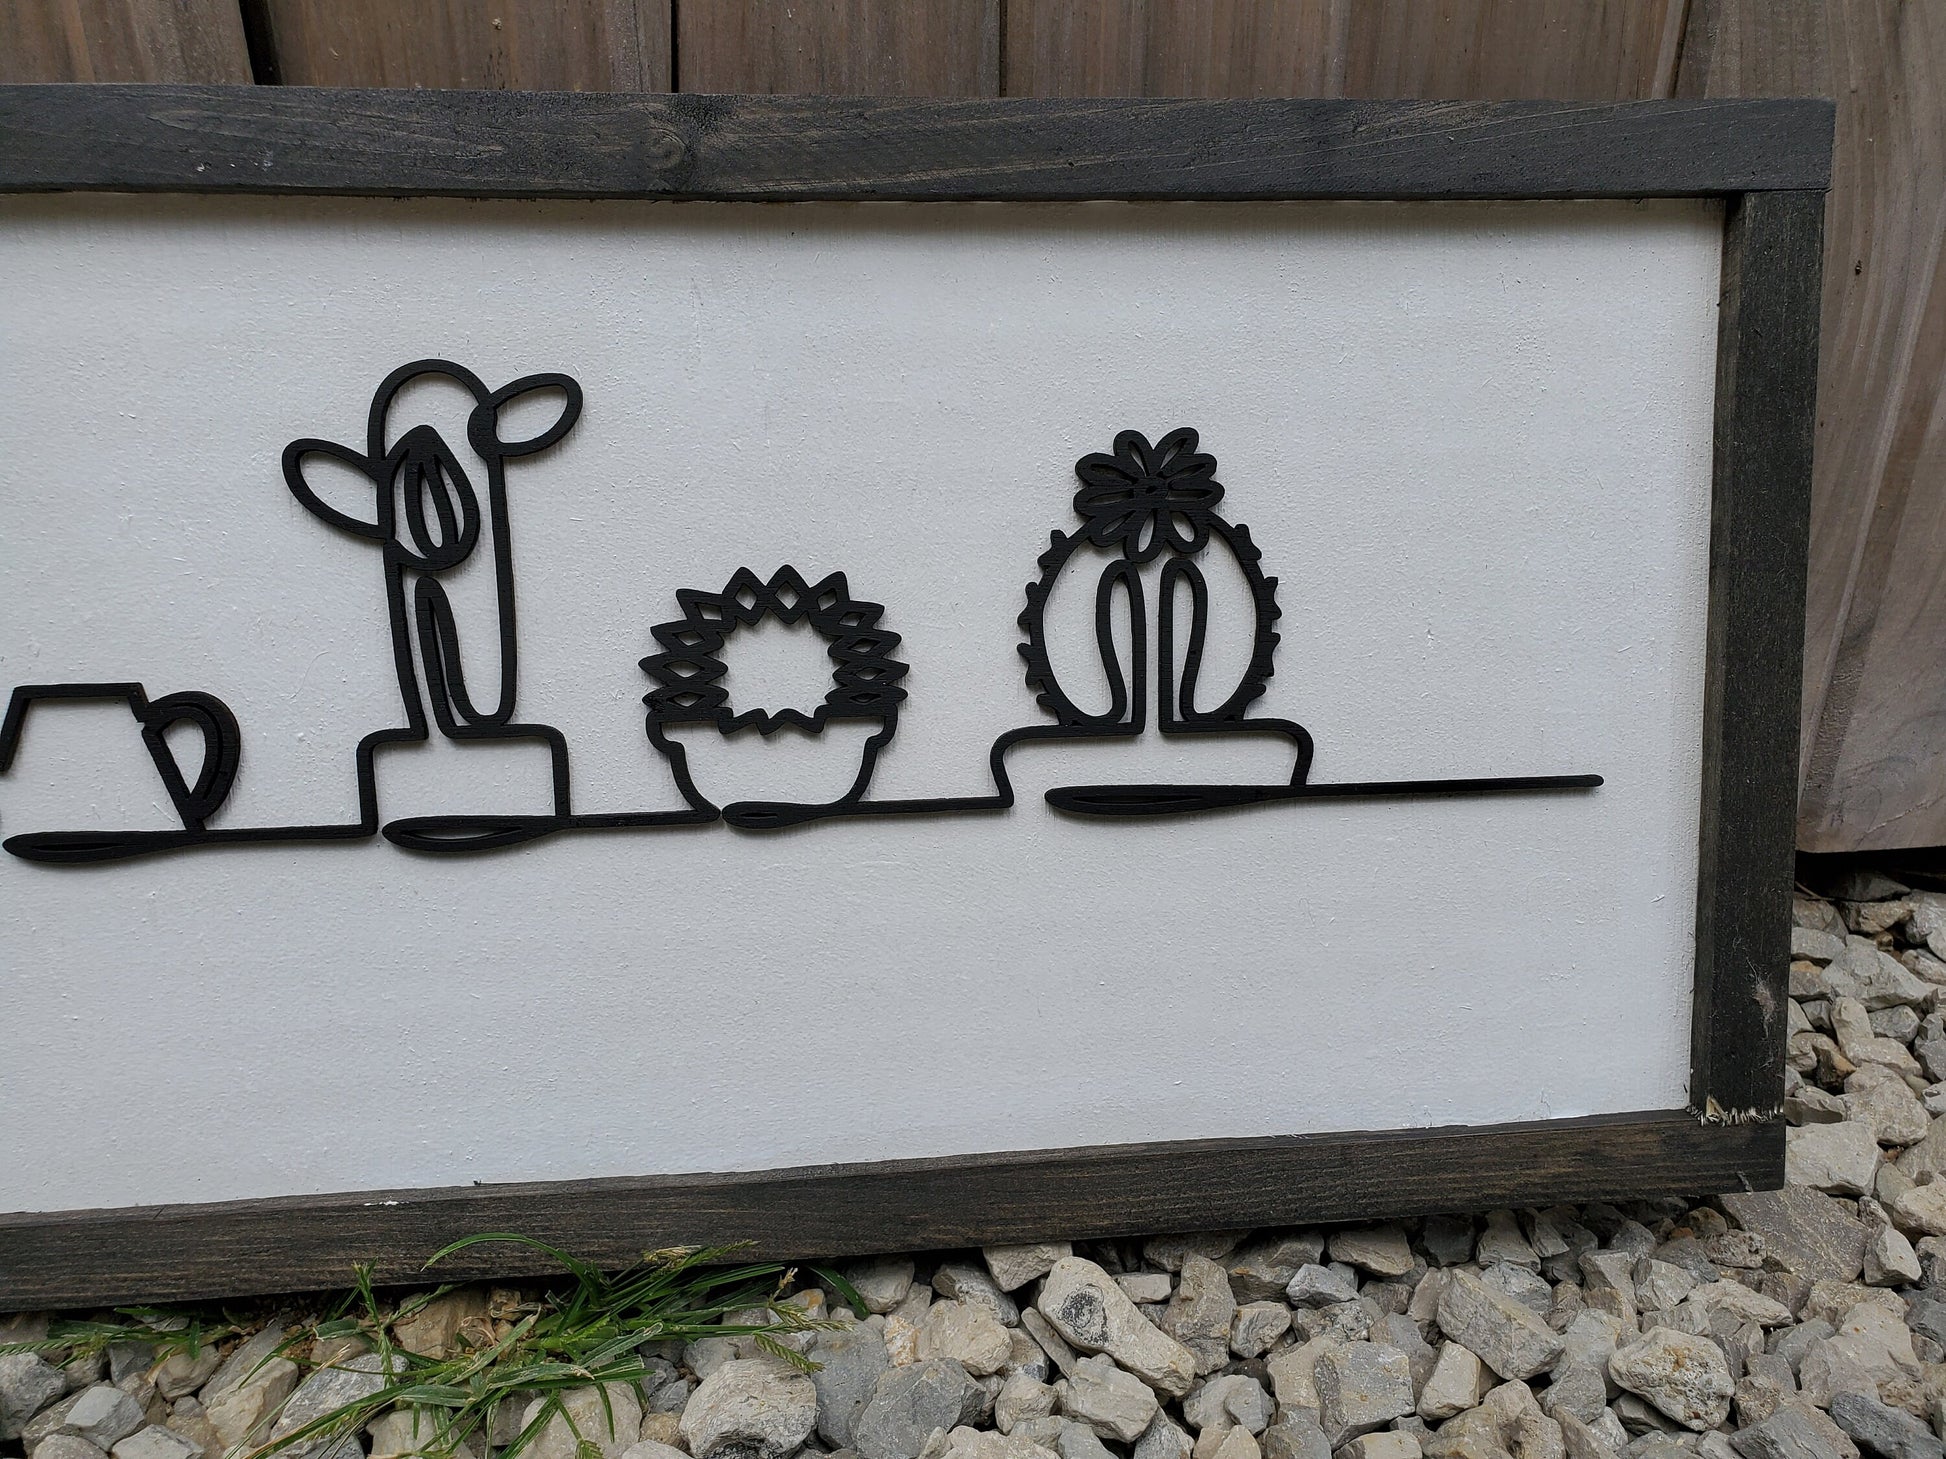 Cat, Cactus, Plants, Kitten, Silhouette, Western, Line Art, 3D, Raised Text Sign, Rustic, Farmhouse, Shabby Chic, Wood, White and Black